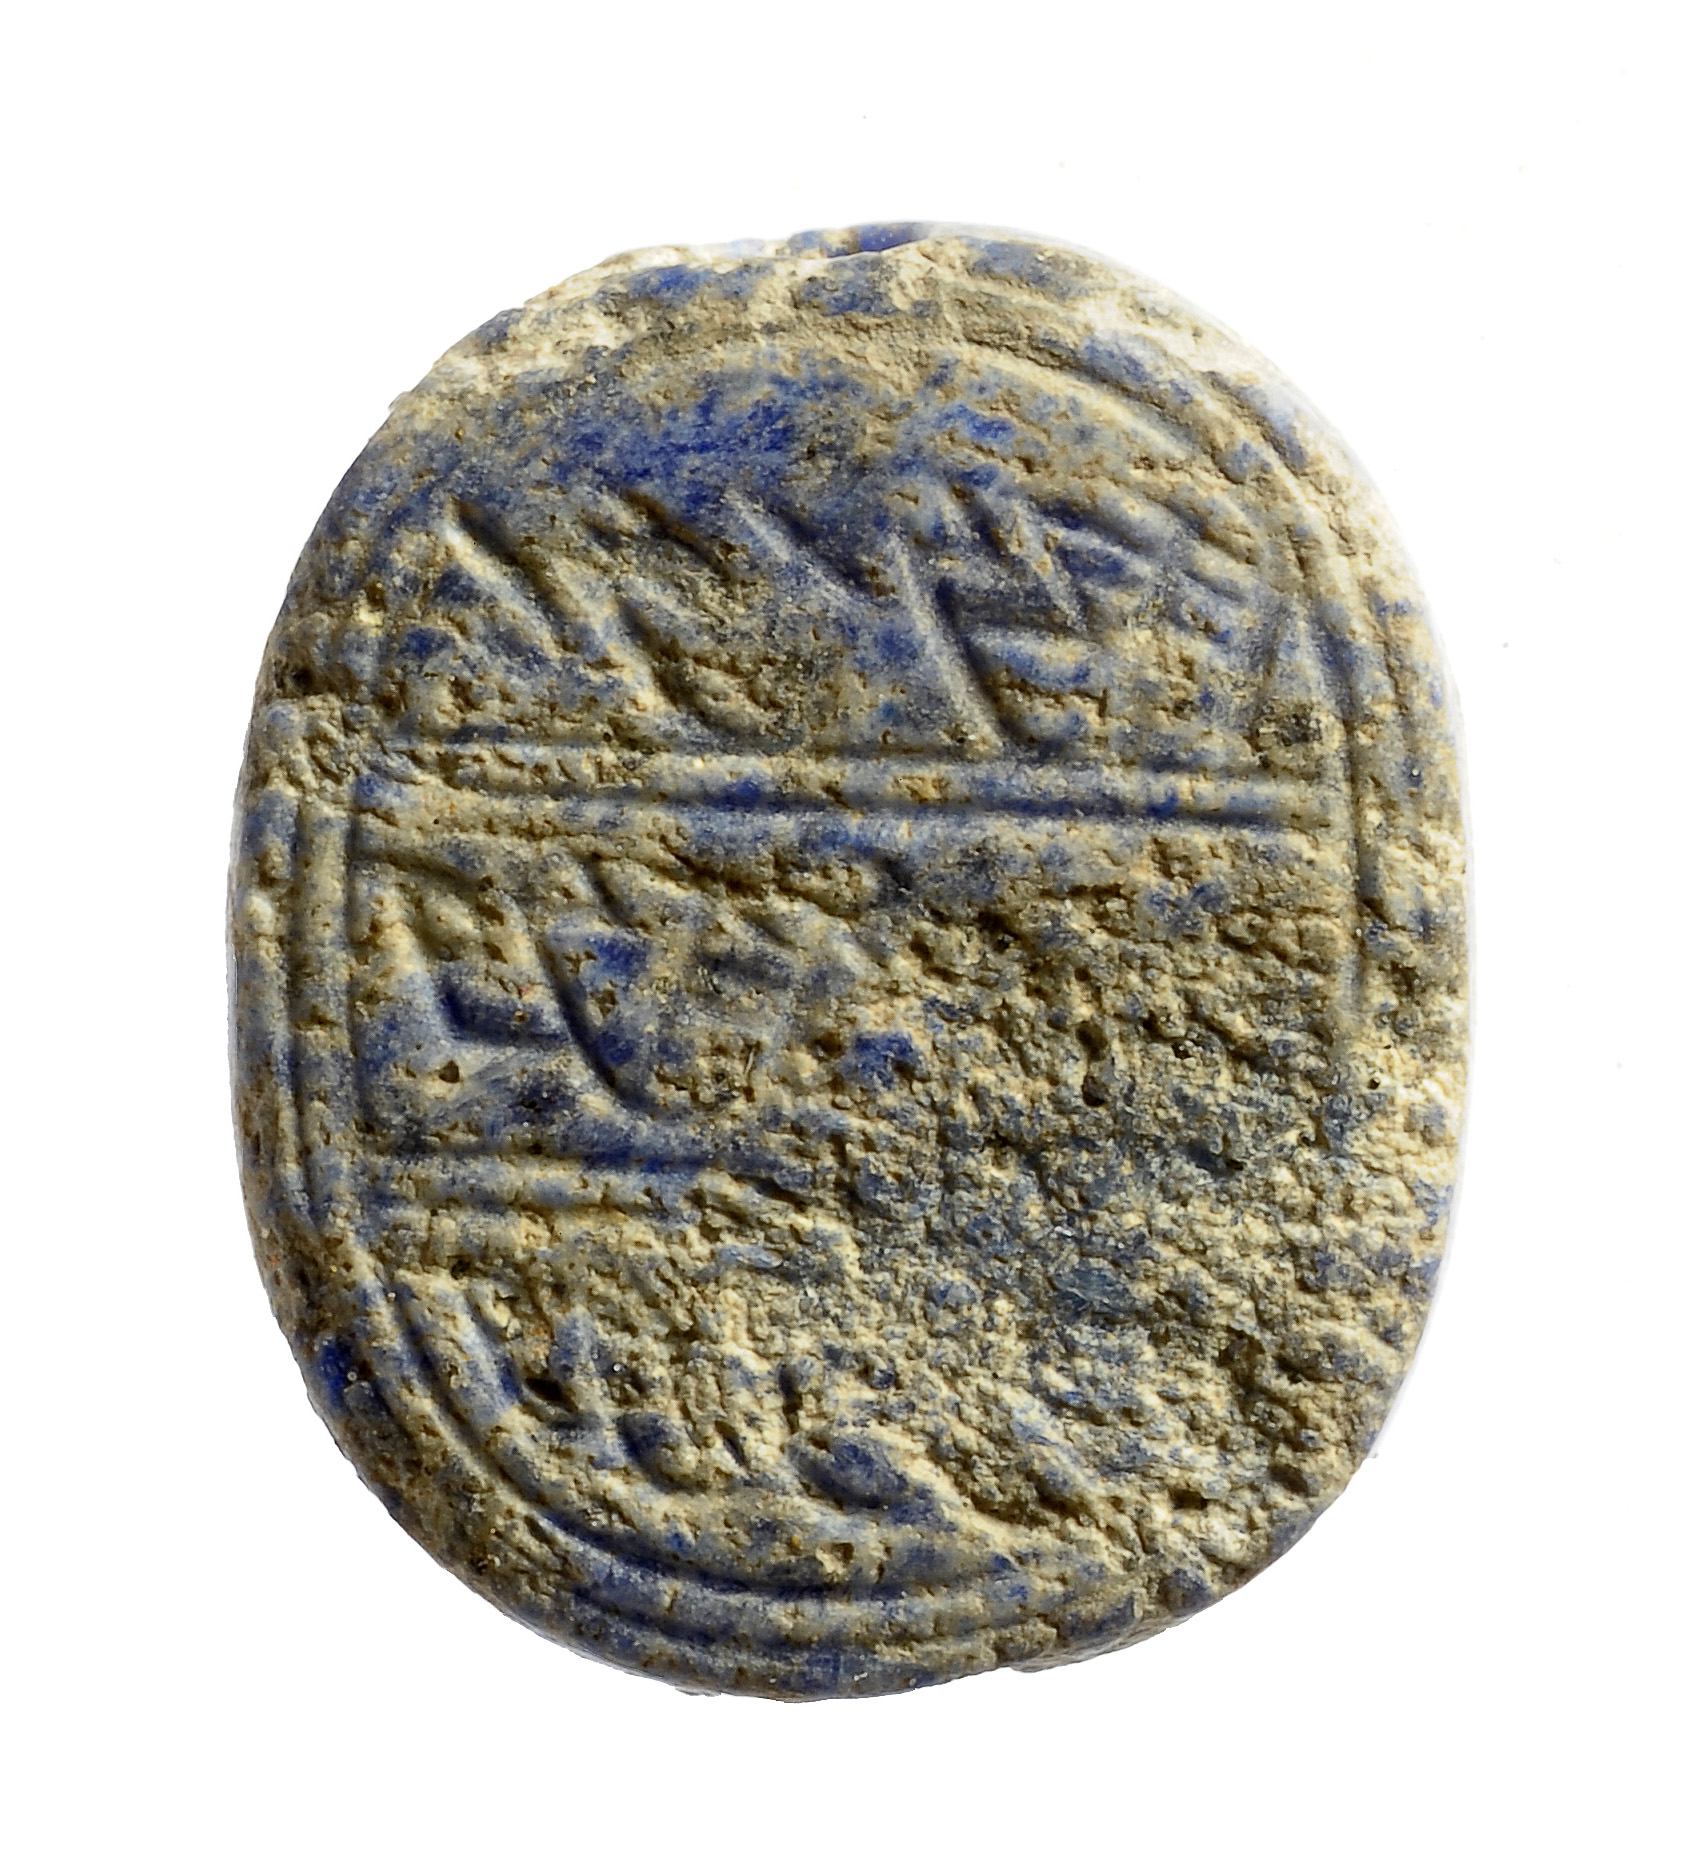 Clay seal from 8th century BCE with name "Netanyahu" in ancient Hebrew writing. Photo: Israel Antiquities Authority